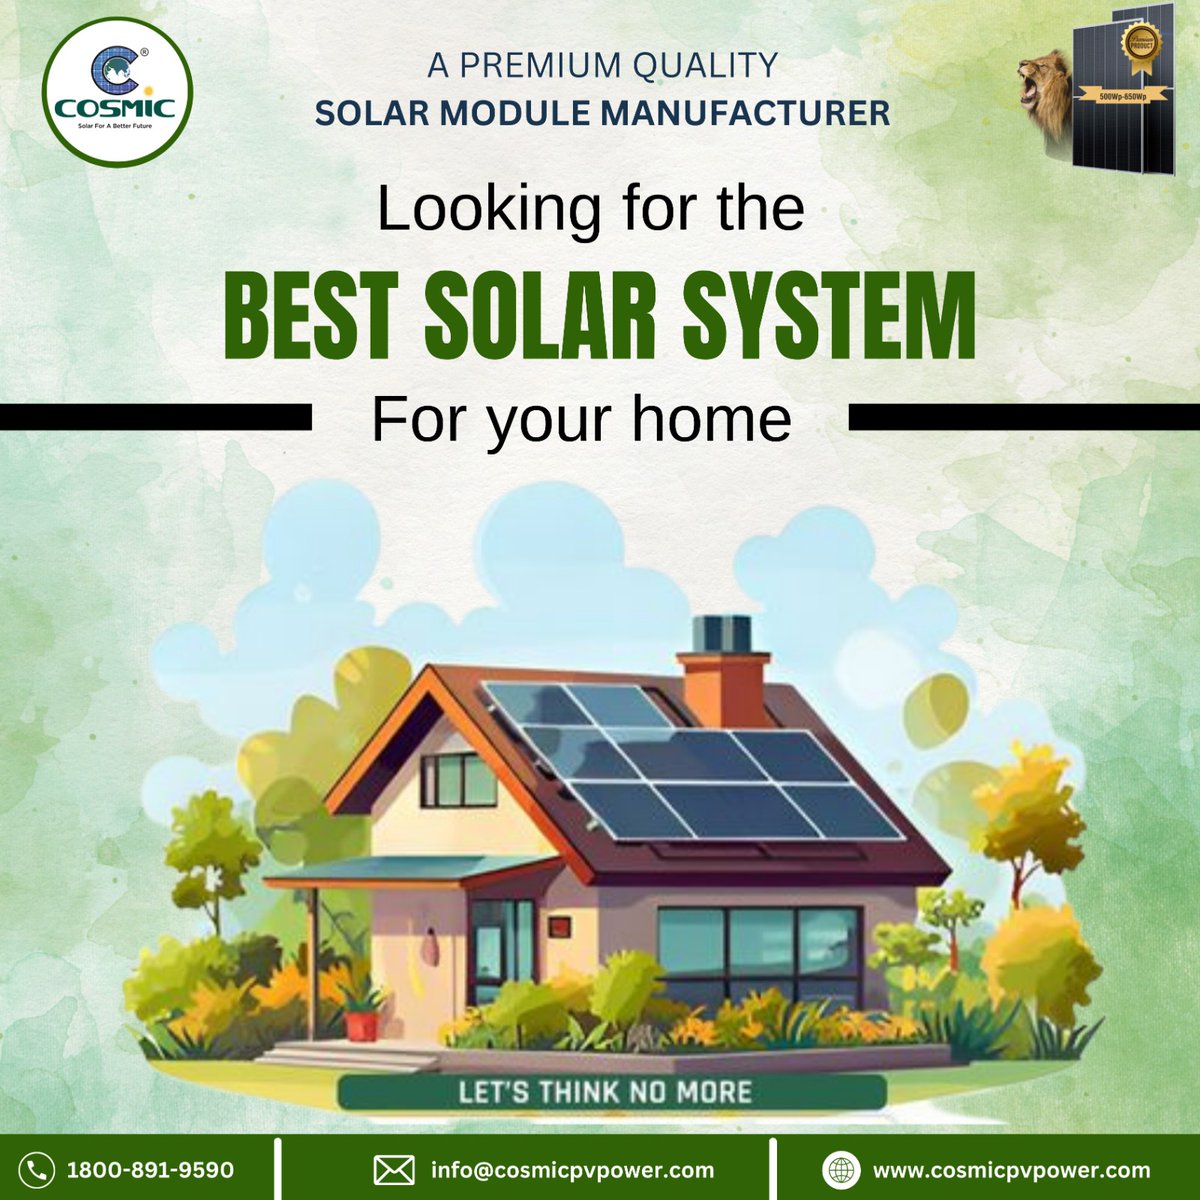 Soar Energy: Resources of Today for a Better Tomorrow. Our Solar Savings Expert can help you beat the heat! Cosmic Solar is the brand that many people trust, having a large base of happy consumers. Visit: cosmicpvpower.com #renewableenergy #solarpower #solarpanel